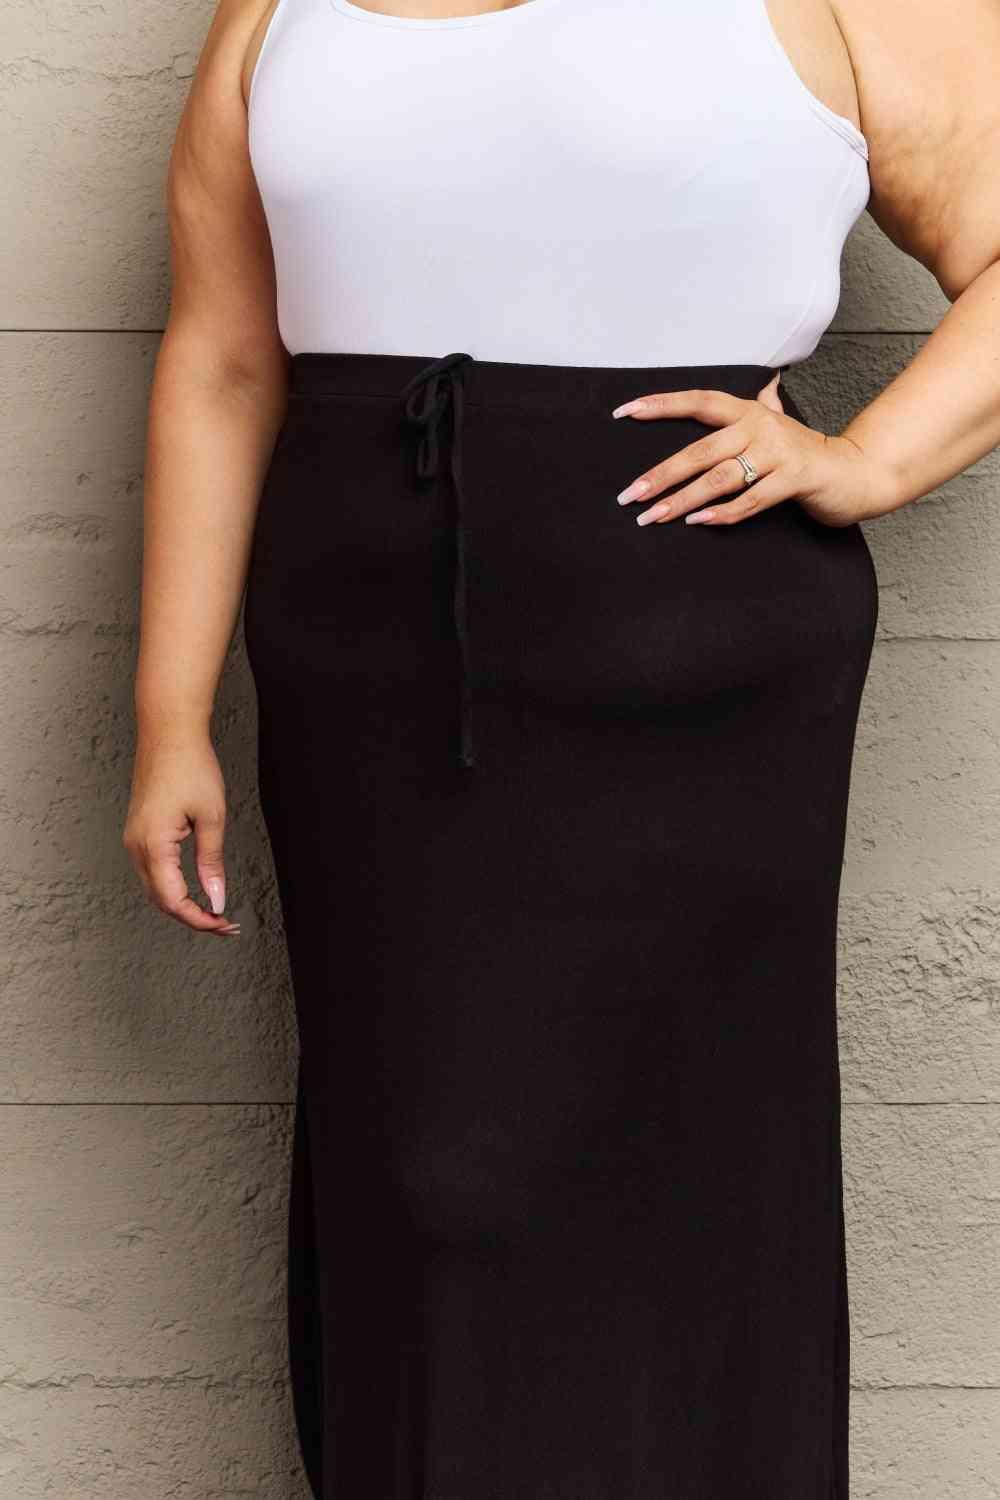 Culture Code For The Day Full Size Flare Maxi Skirt in Black - Immenzive